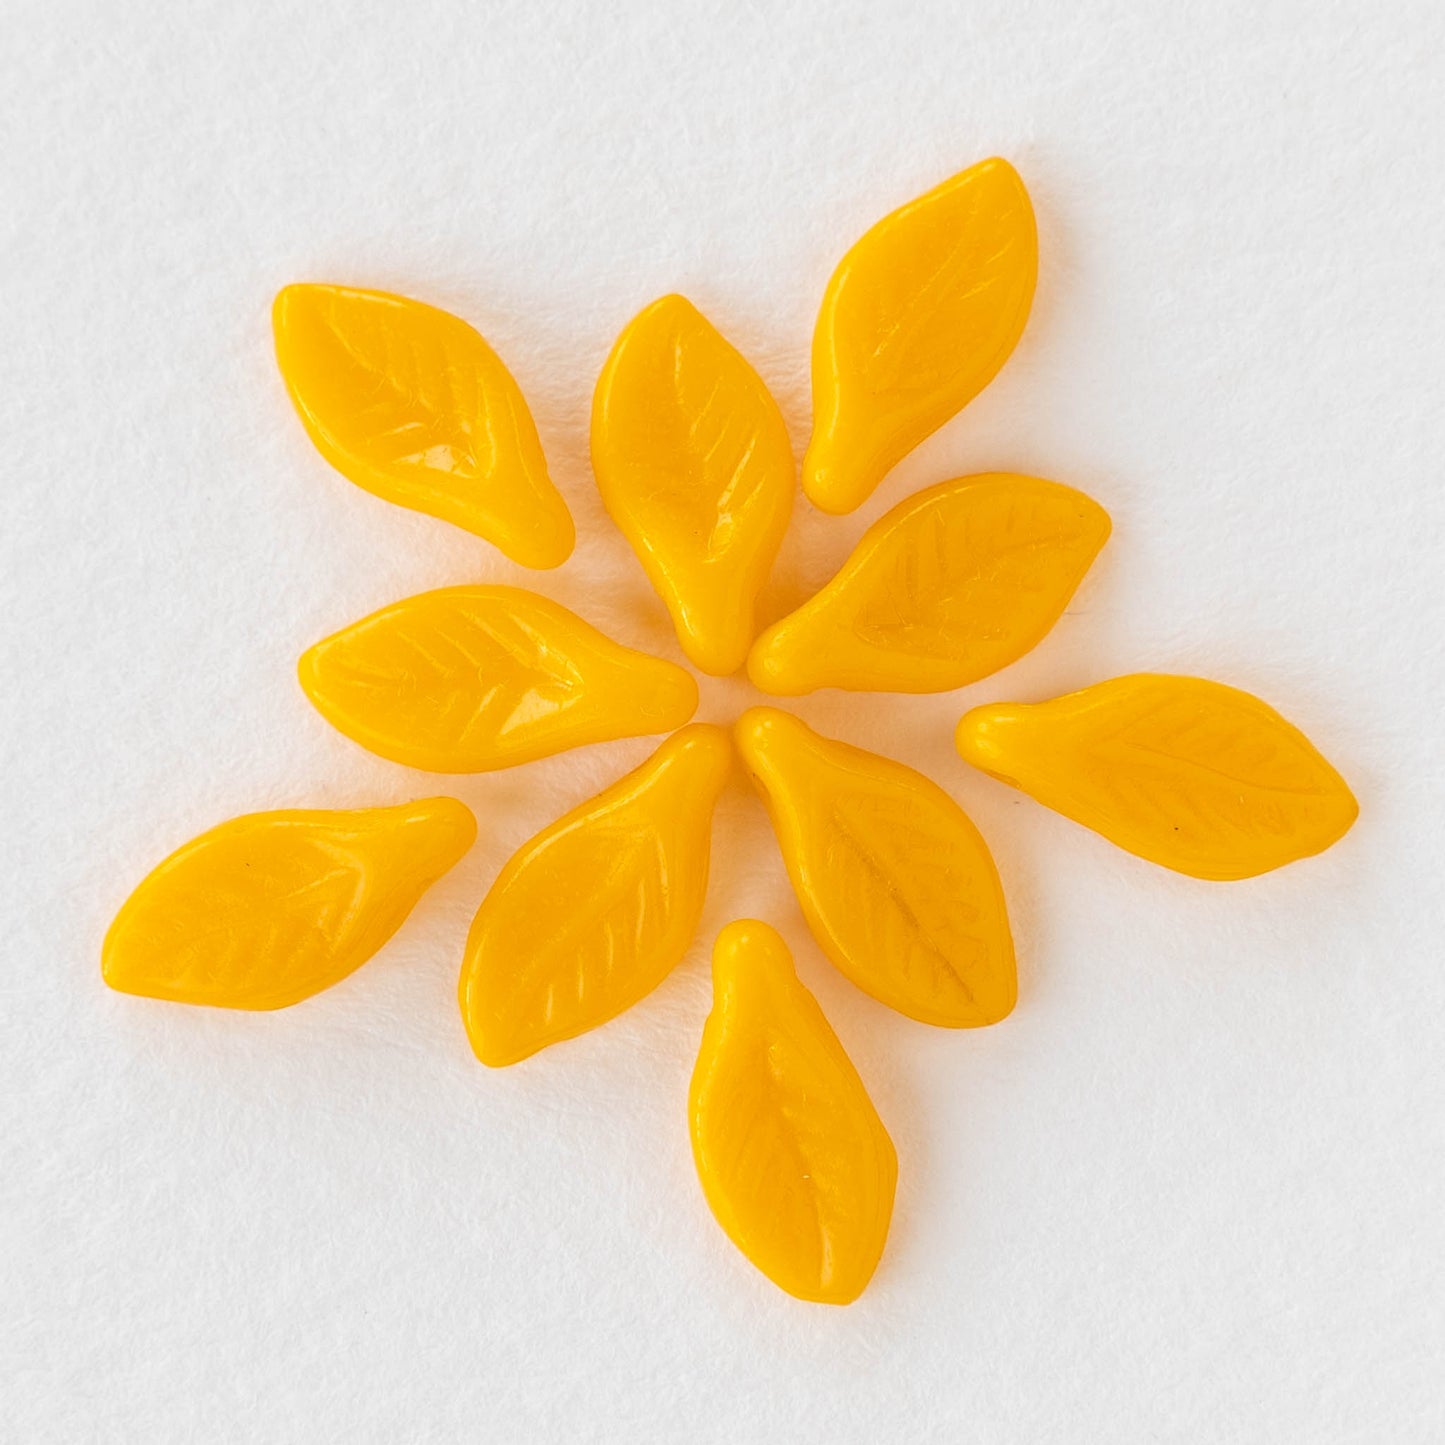 Load image into Gallery viewer, 6x12mm Glass Leaf Beads - Opaque Sunflower Yellow - 30 beads
